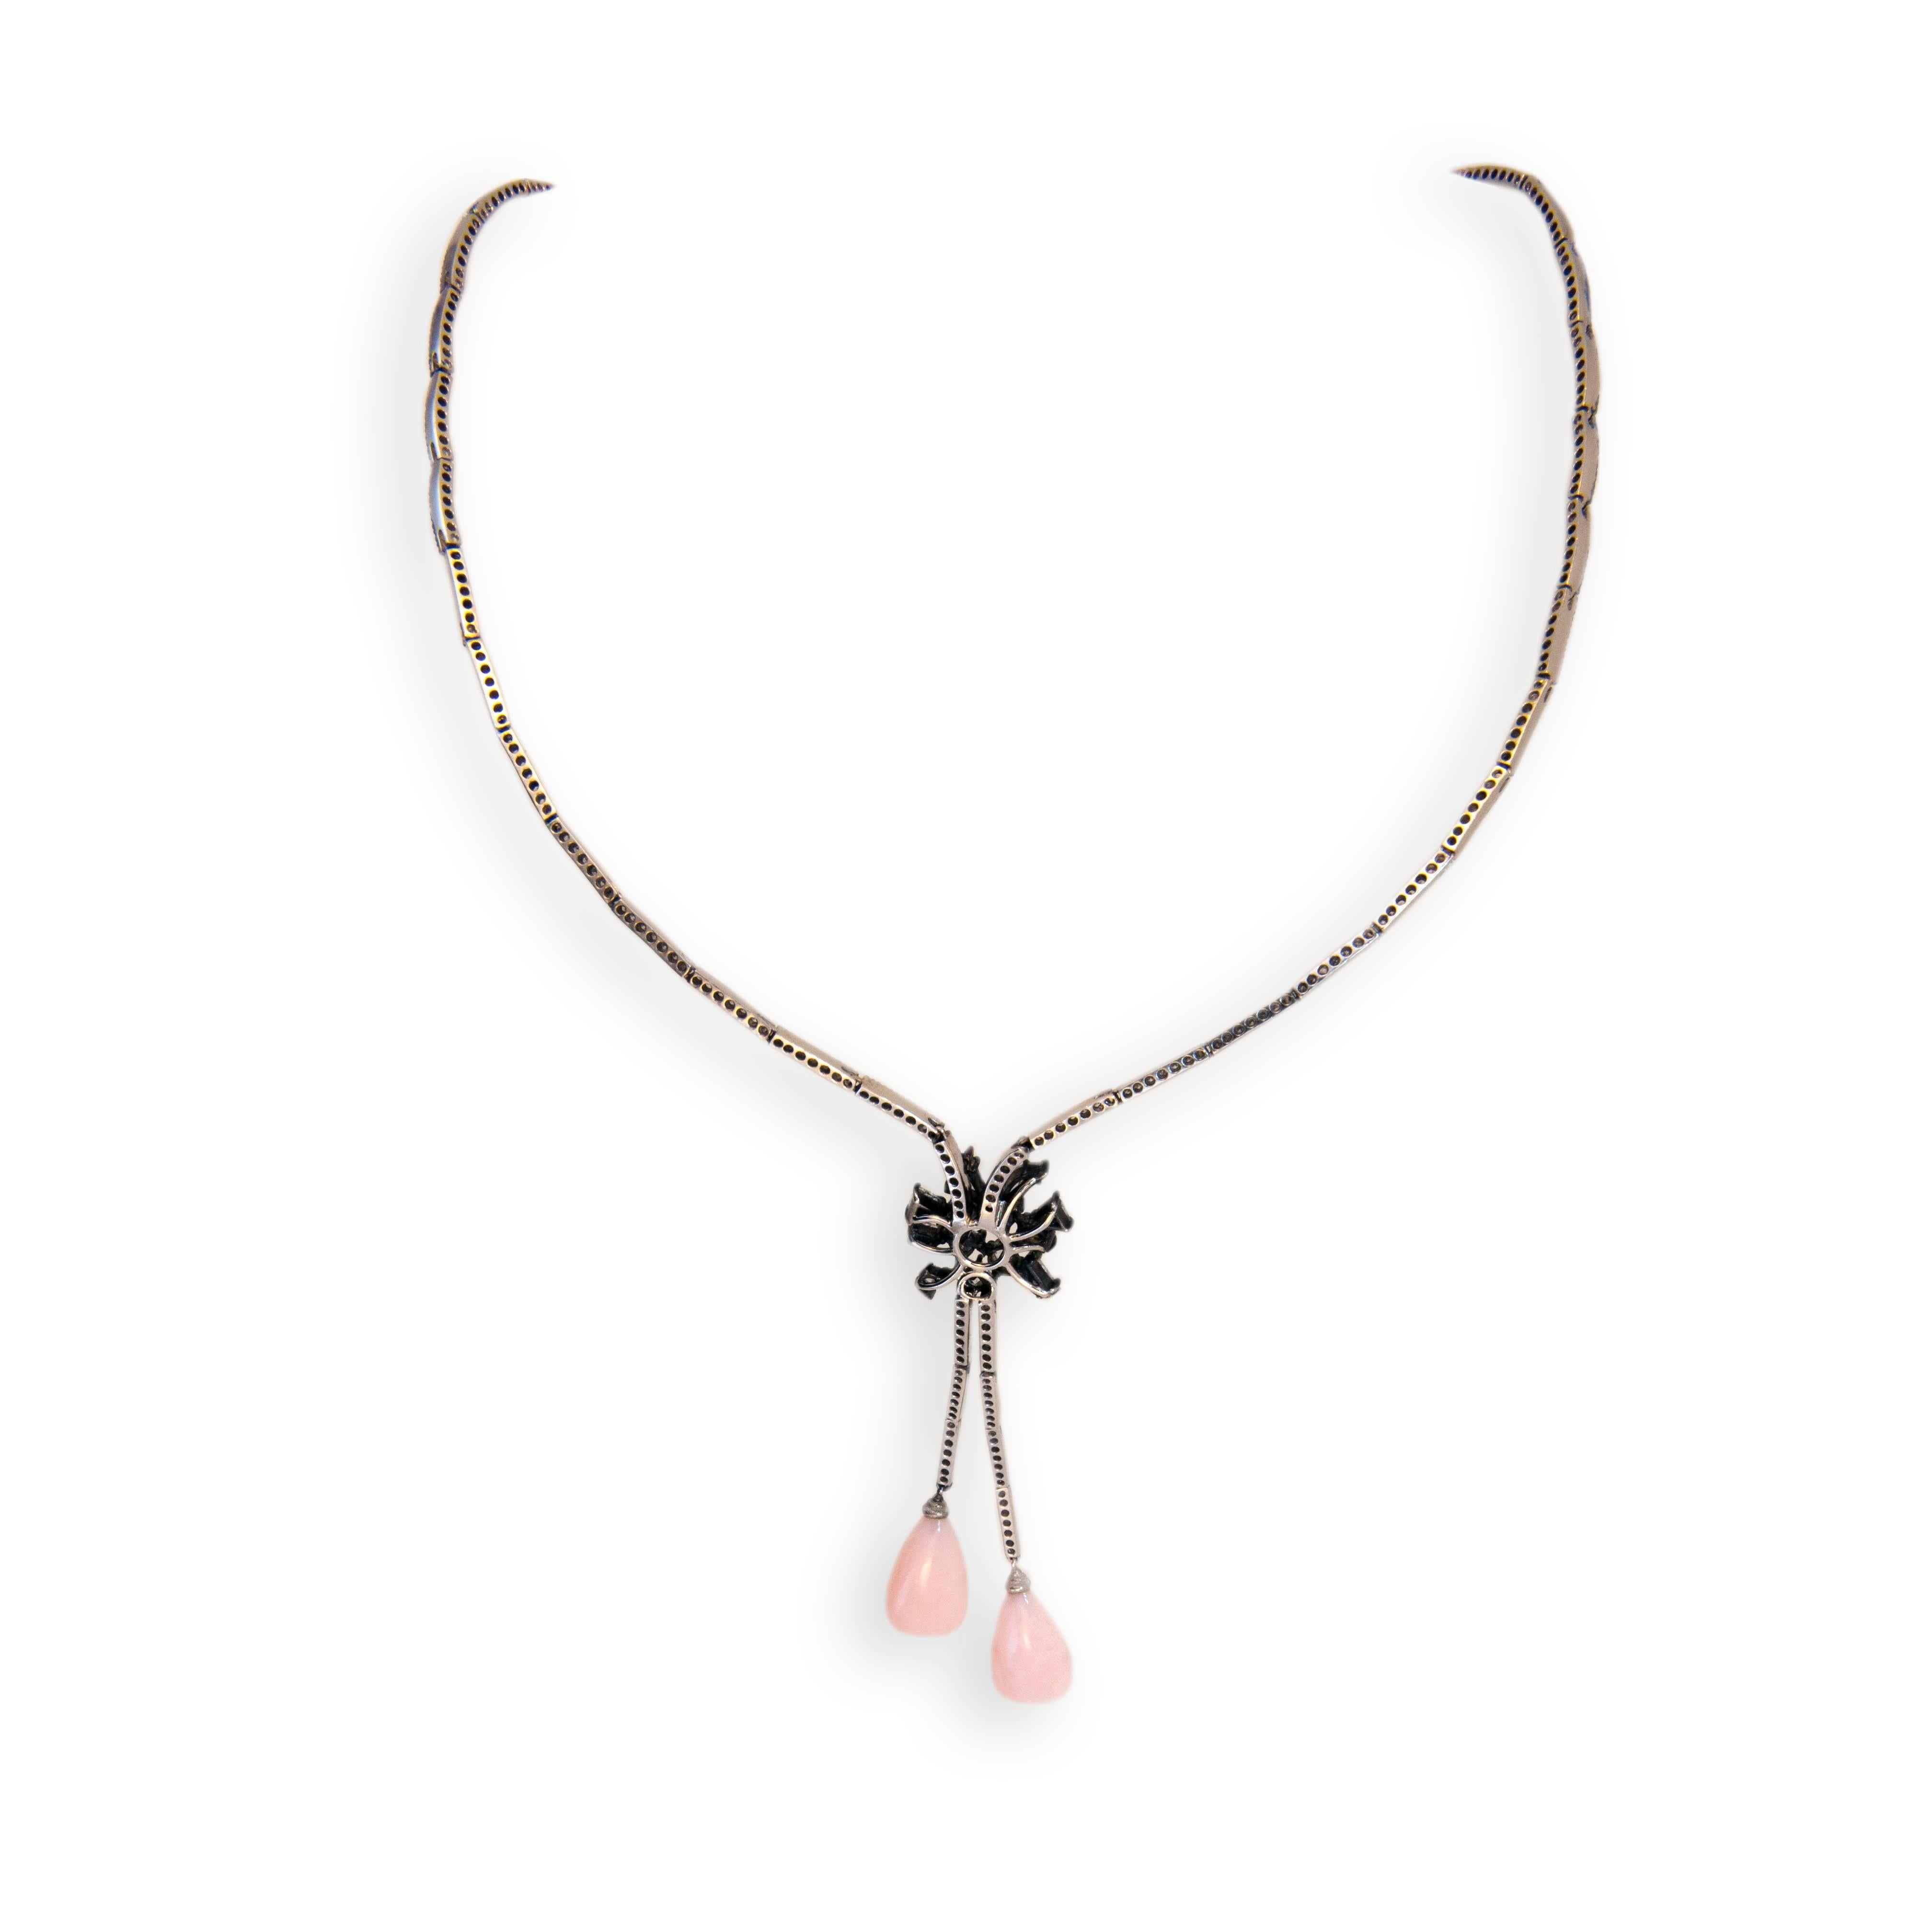 18 karat blackened white gold necklace with (2) Pink Opal drops 10.66 carats total weight, (13) fancy shaped Rose cut Diamonds 1.44 carats total weight and 331 round Diamonds 2.64 carats total weight. 16 inches length.